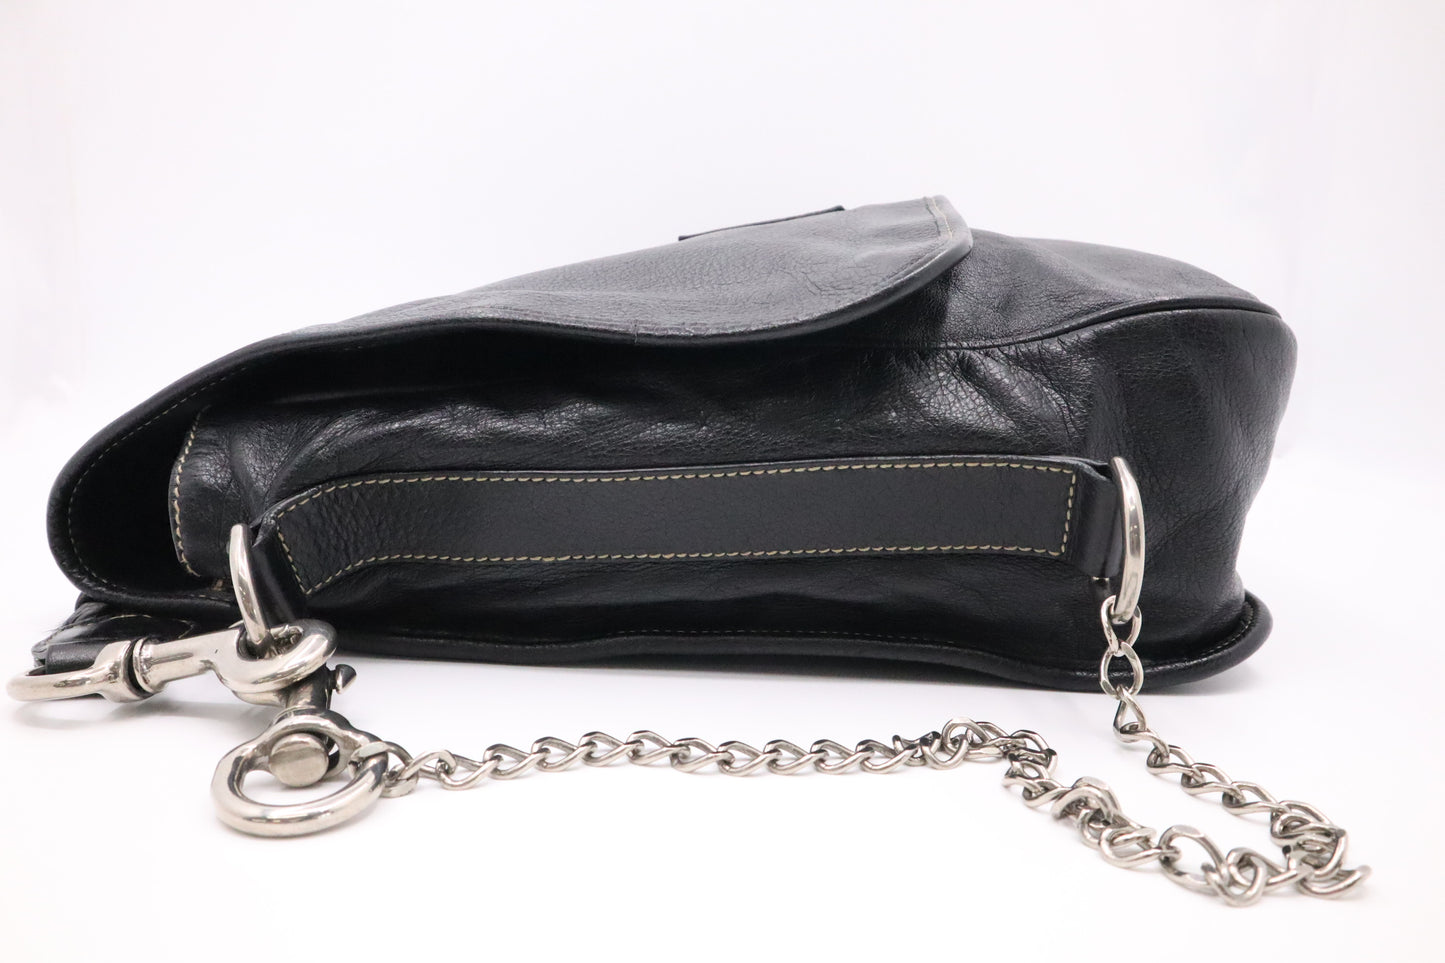 Gucci Crest Chain Messenger Bag in Black Leather